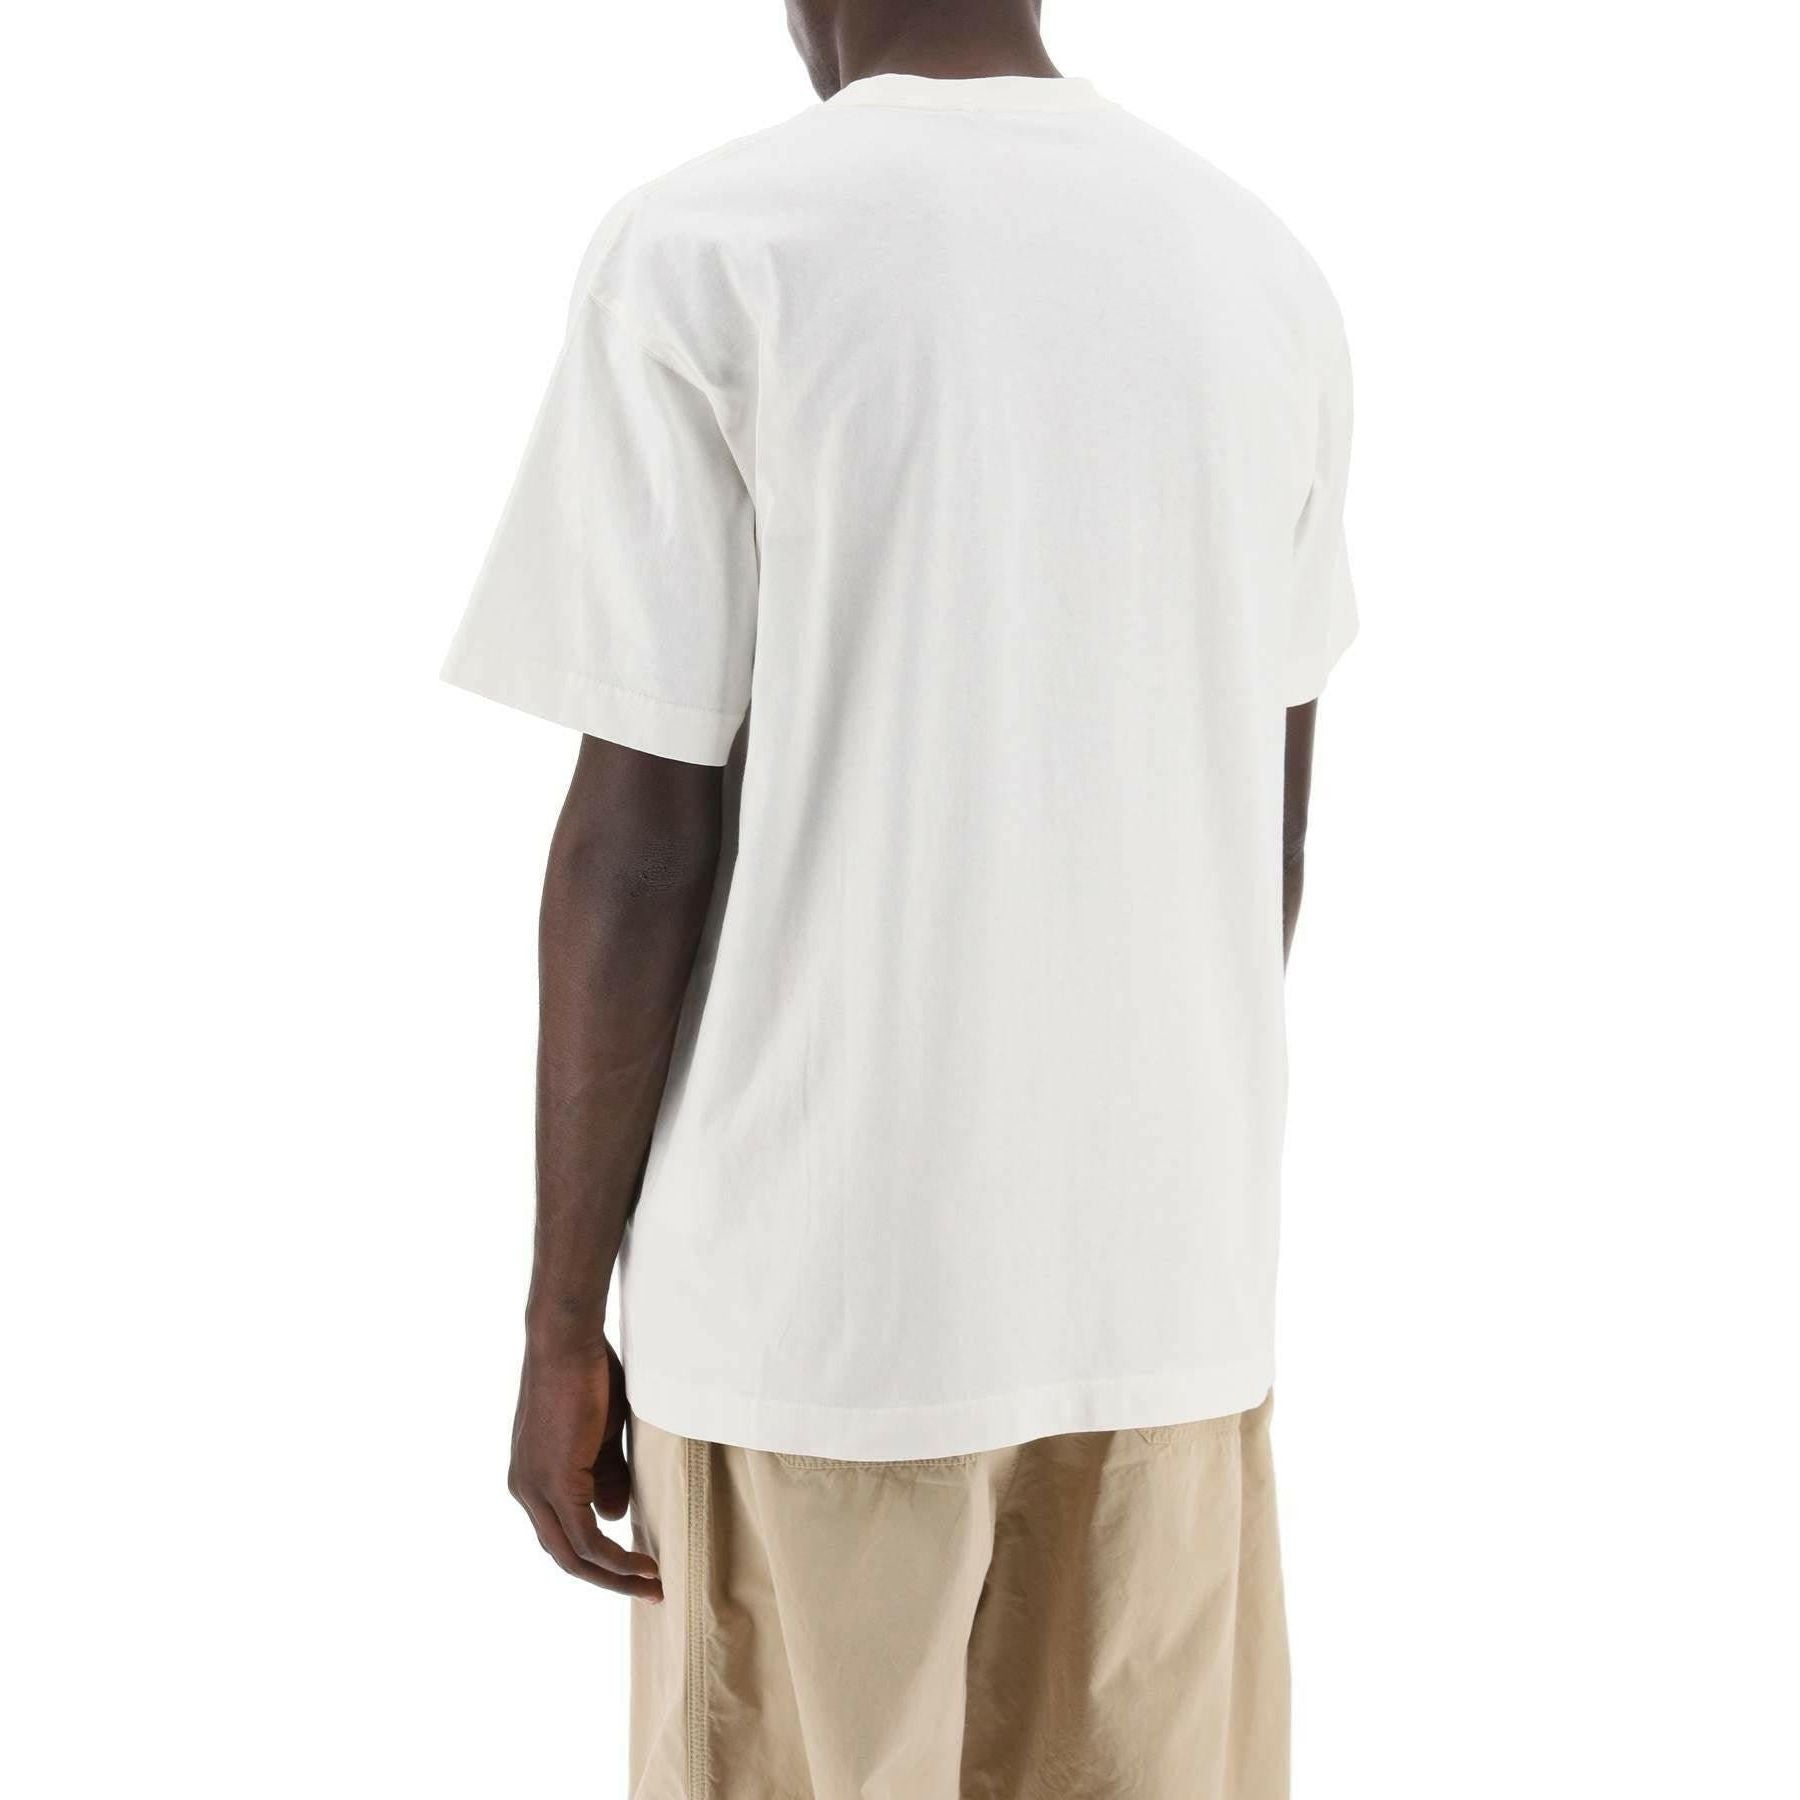 Wax White Cotton Jersey T-Shirt With Lived-In Look CARHARTT WIP JOHN JULIA.